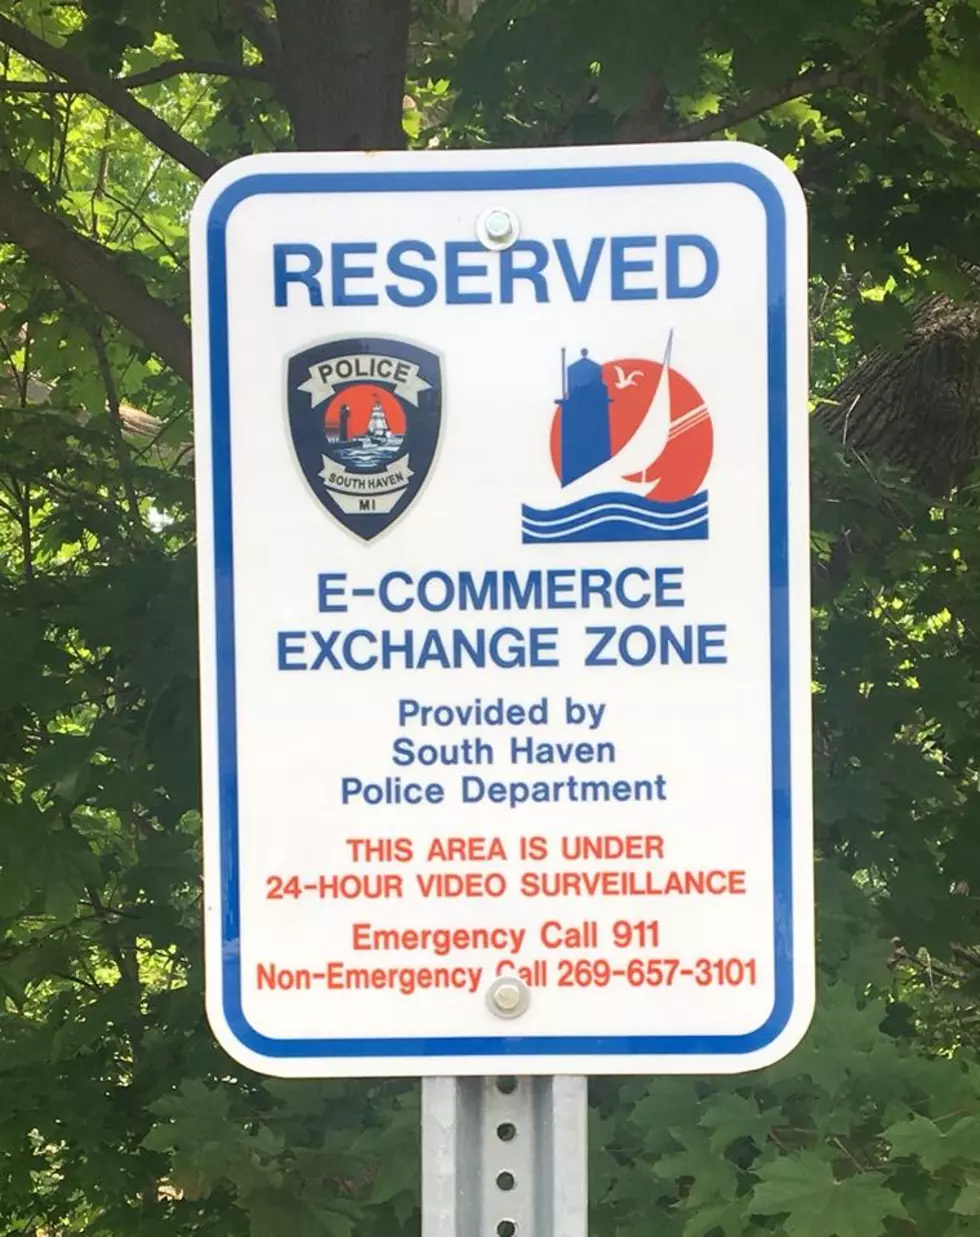 “Safe Parking Spaces” Added in South Haven for Online Transactions